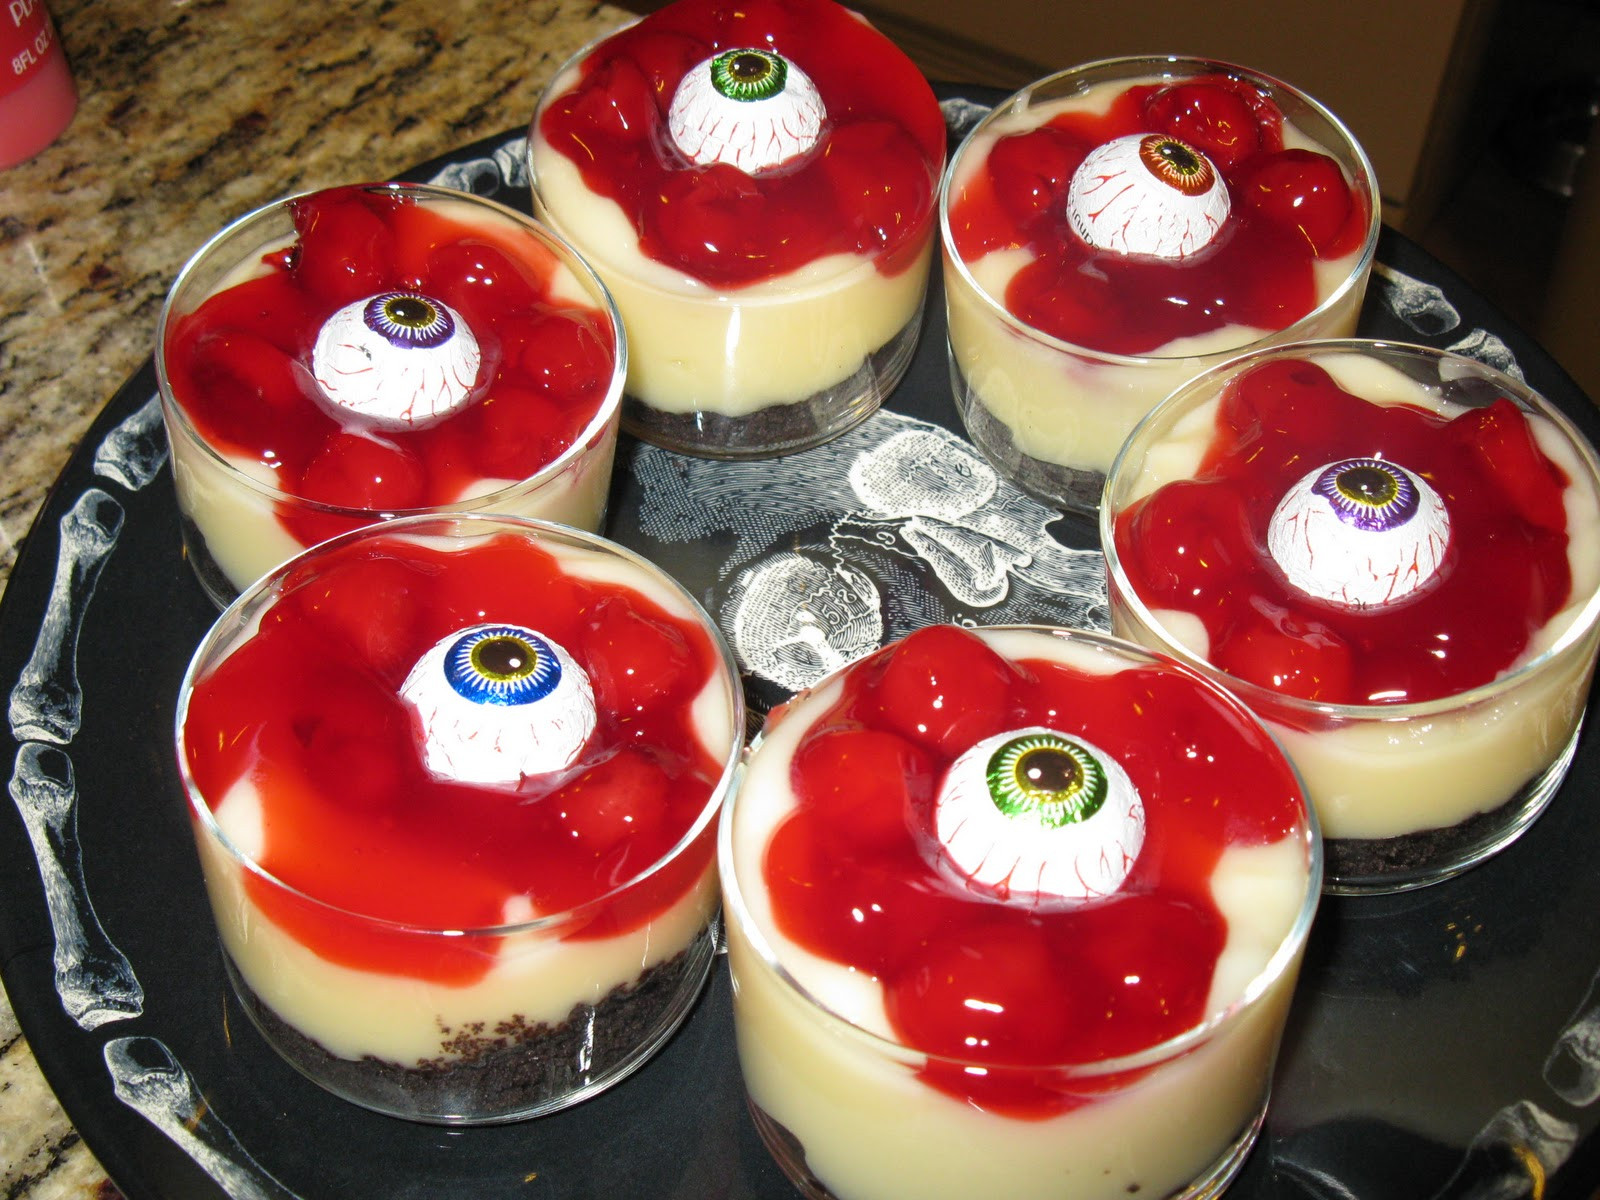 Scary Halloween Desserts
 What You Make it Day 27 of 31 Spooktacular Blood and